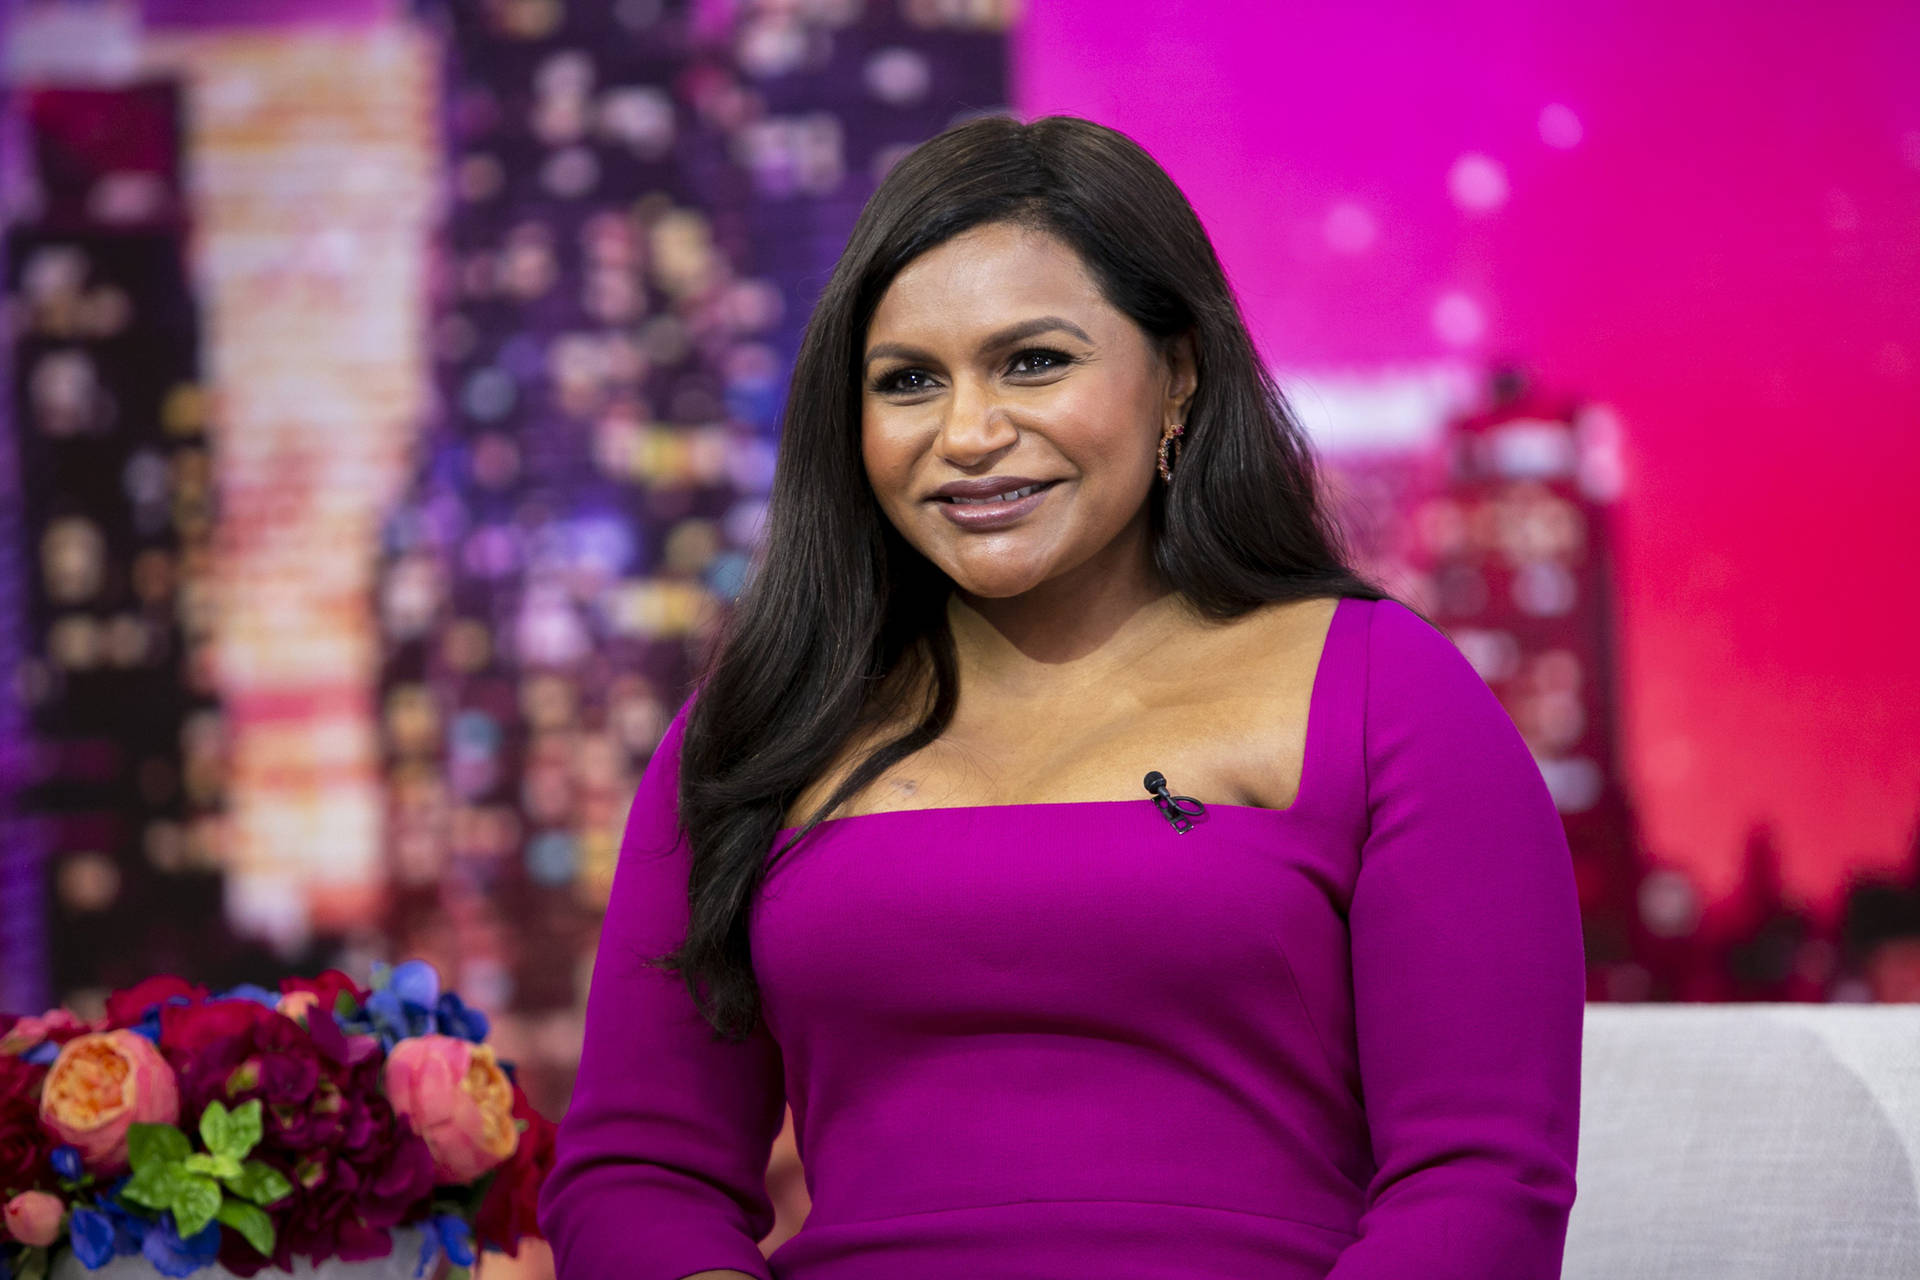 Mindy Kaling Best Selling Author